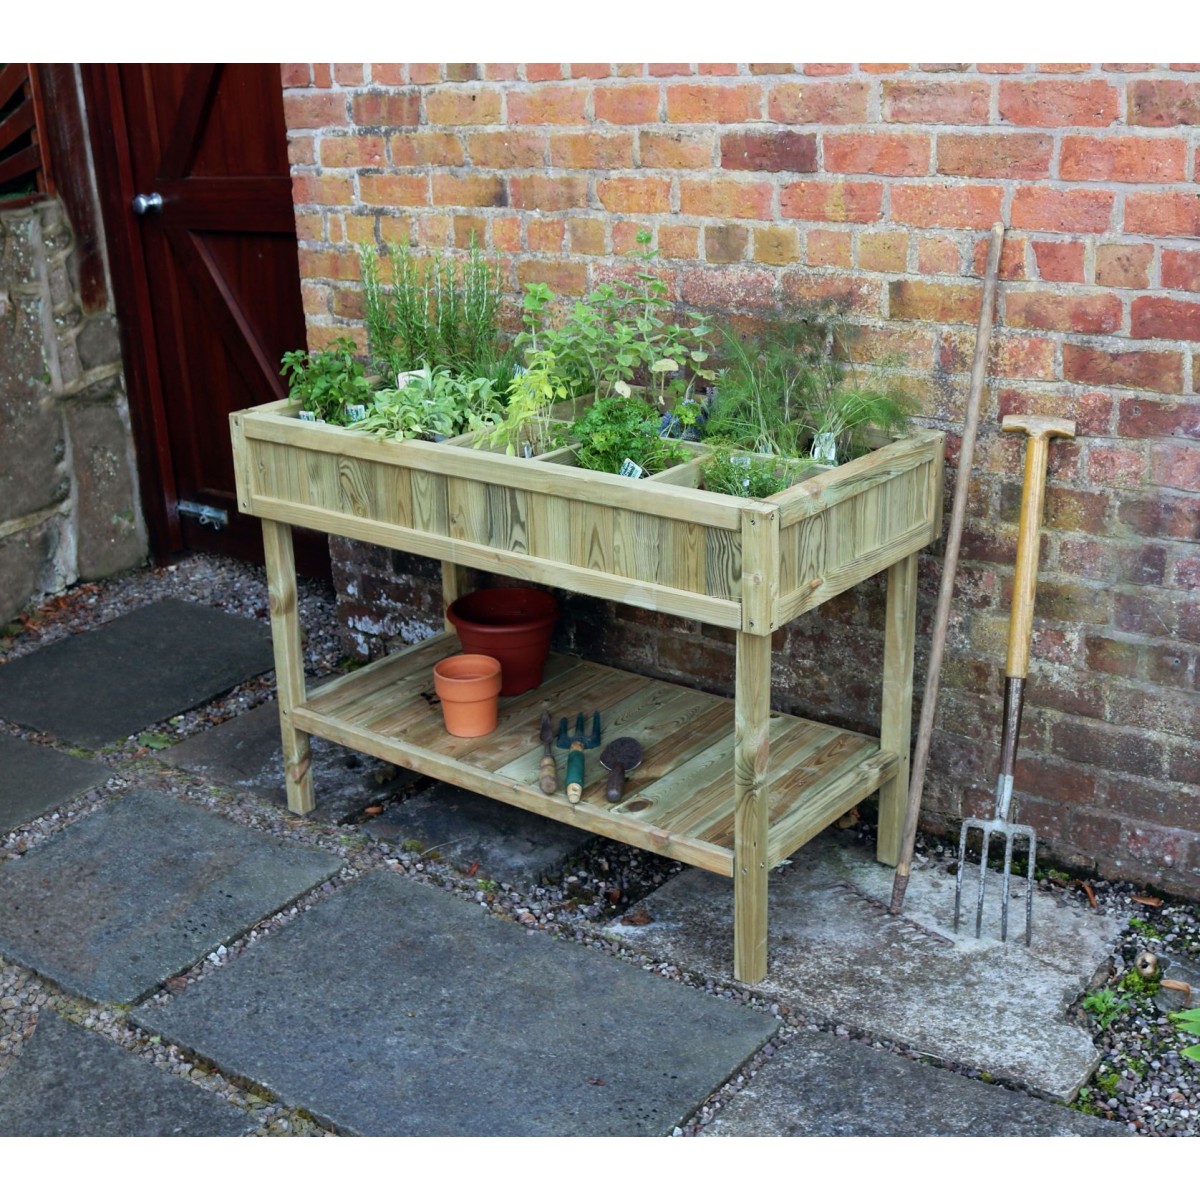 Raised Planter Stand for Herbs, Flowers, Plants and Vegetables